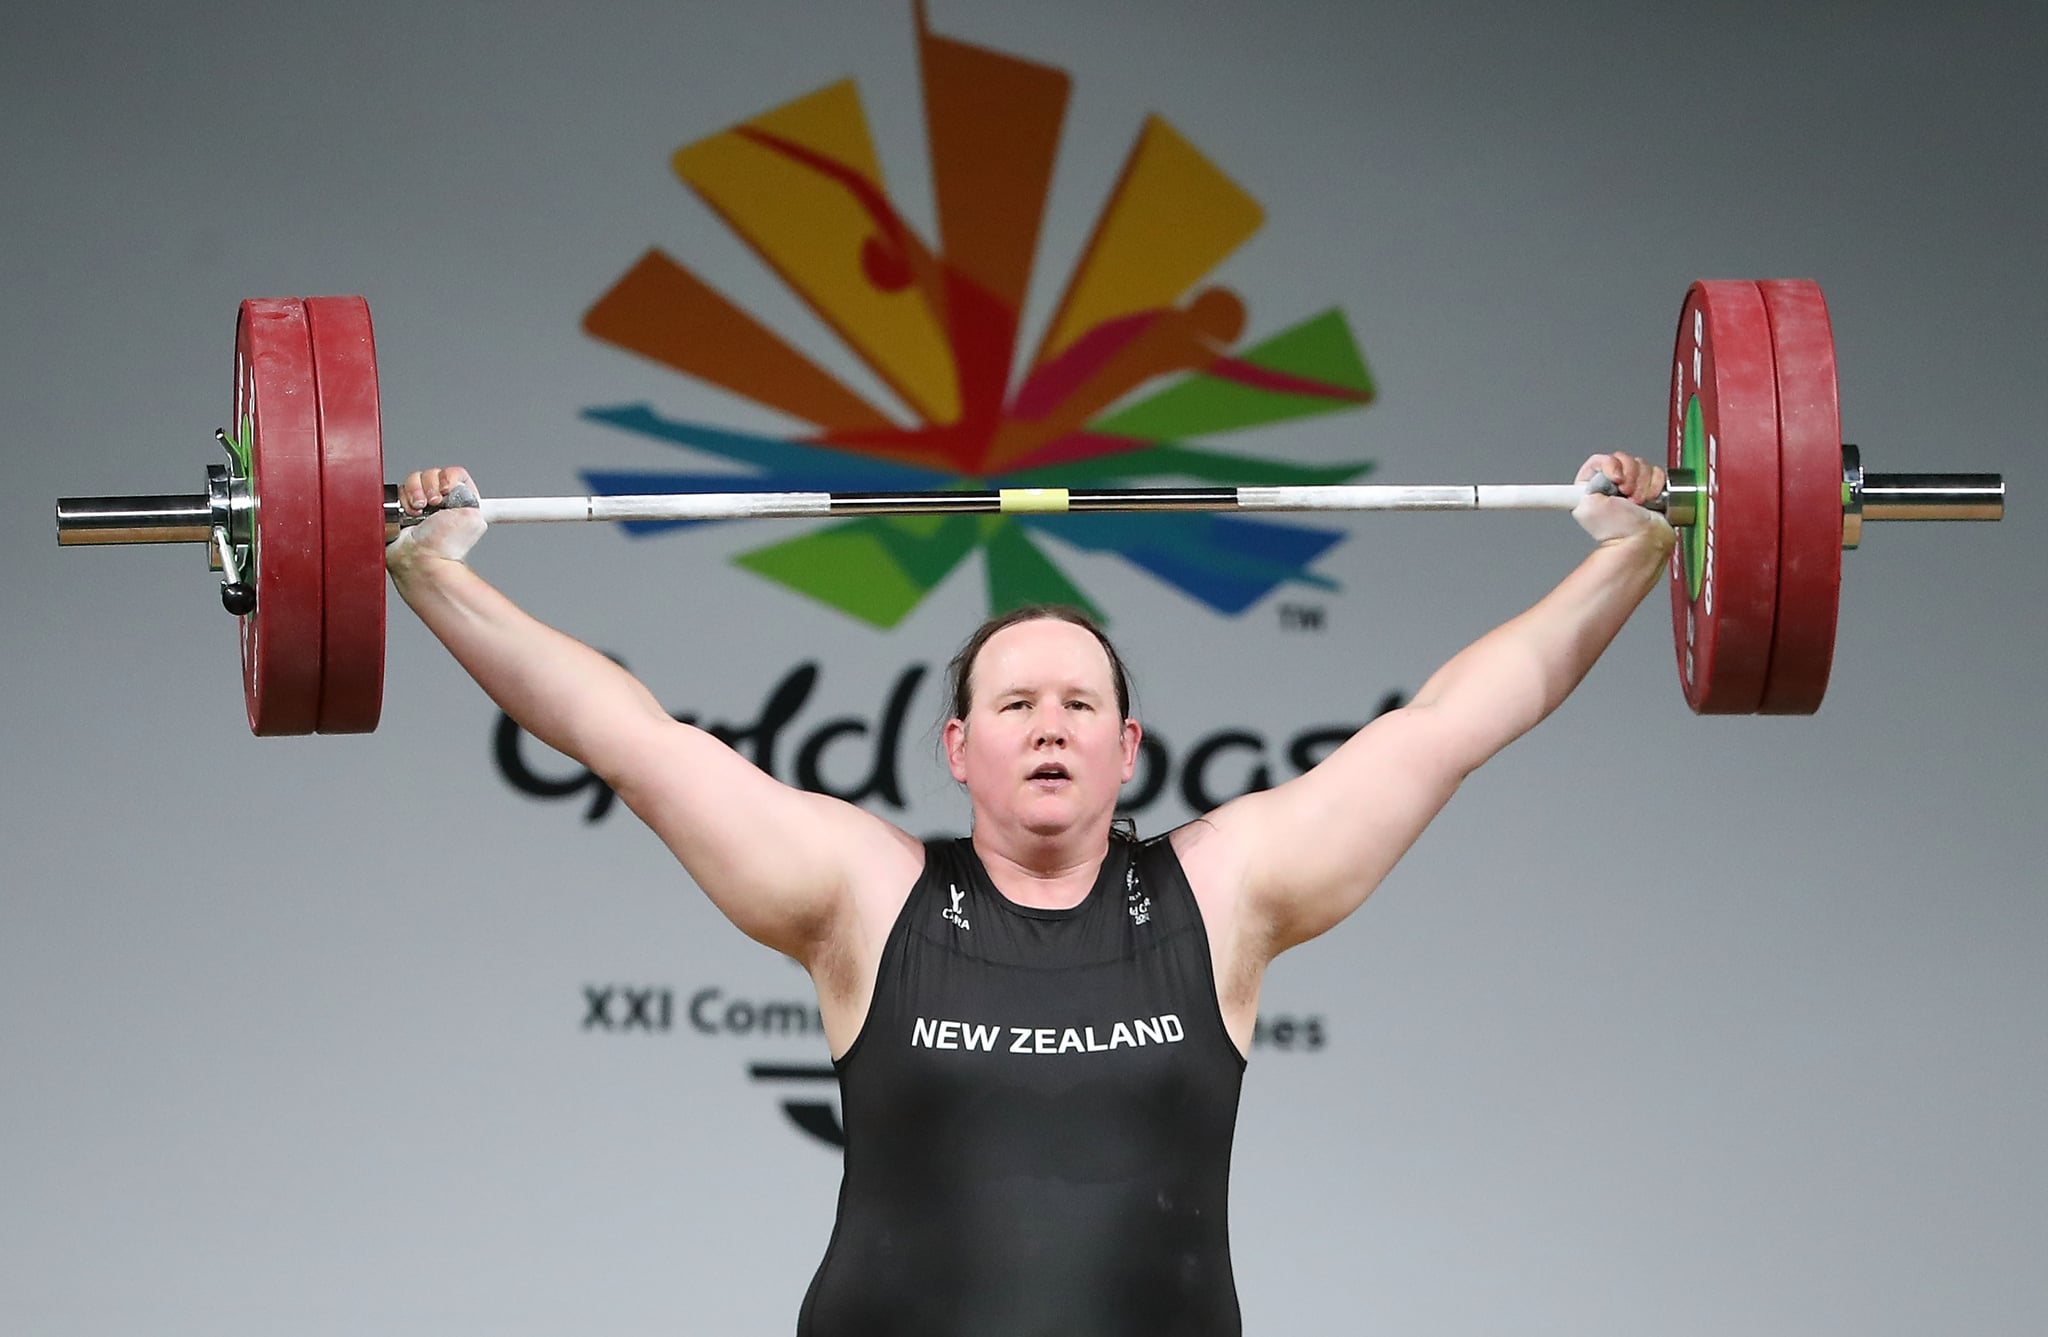 GOLD COAST, AUSTRALIA - APRIL 09:  Laurel Hubbard of New Zealand competes in the Women's +90kg Final during the Weightlifting on day five of the Gold Coast 2018 Commonwealth Games at Carrara Sports and Leisure Centre on April 9, 2018 on the Gold Coast, Australia.  (Photo by Scott Barbour/Getty Images)